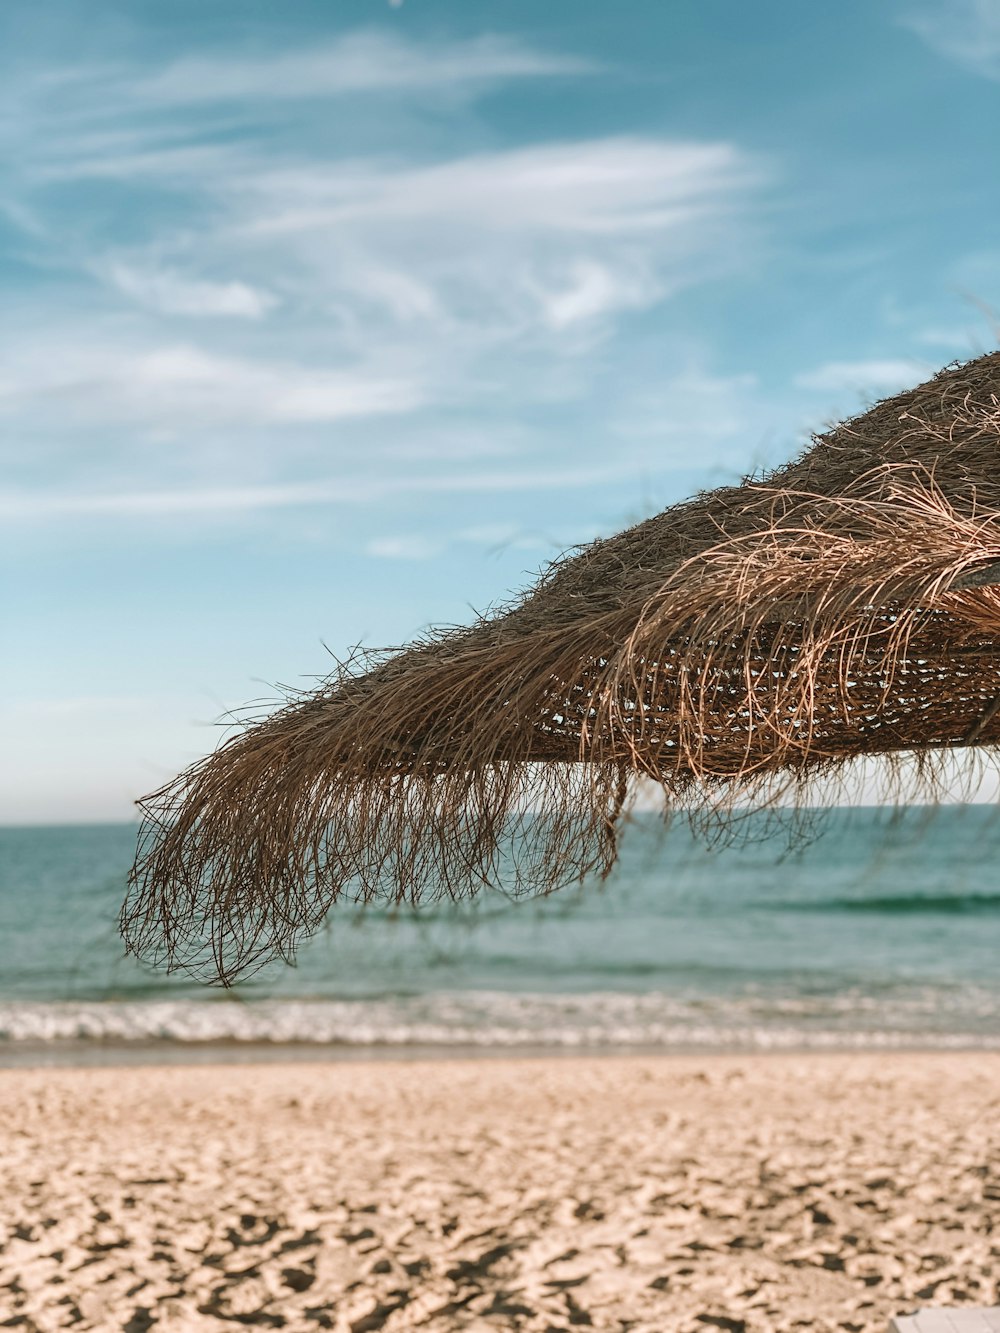 thatch parasol on sand seashore during day